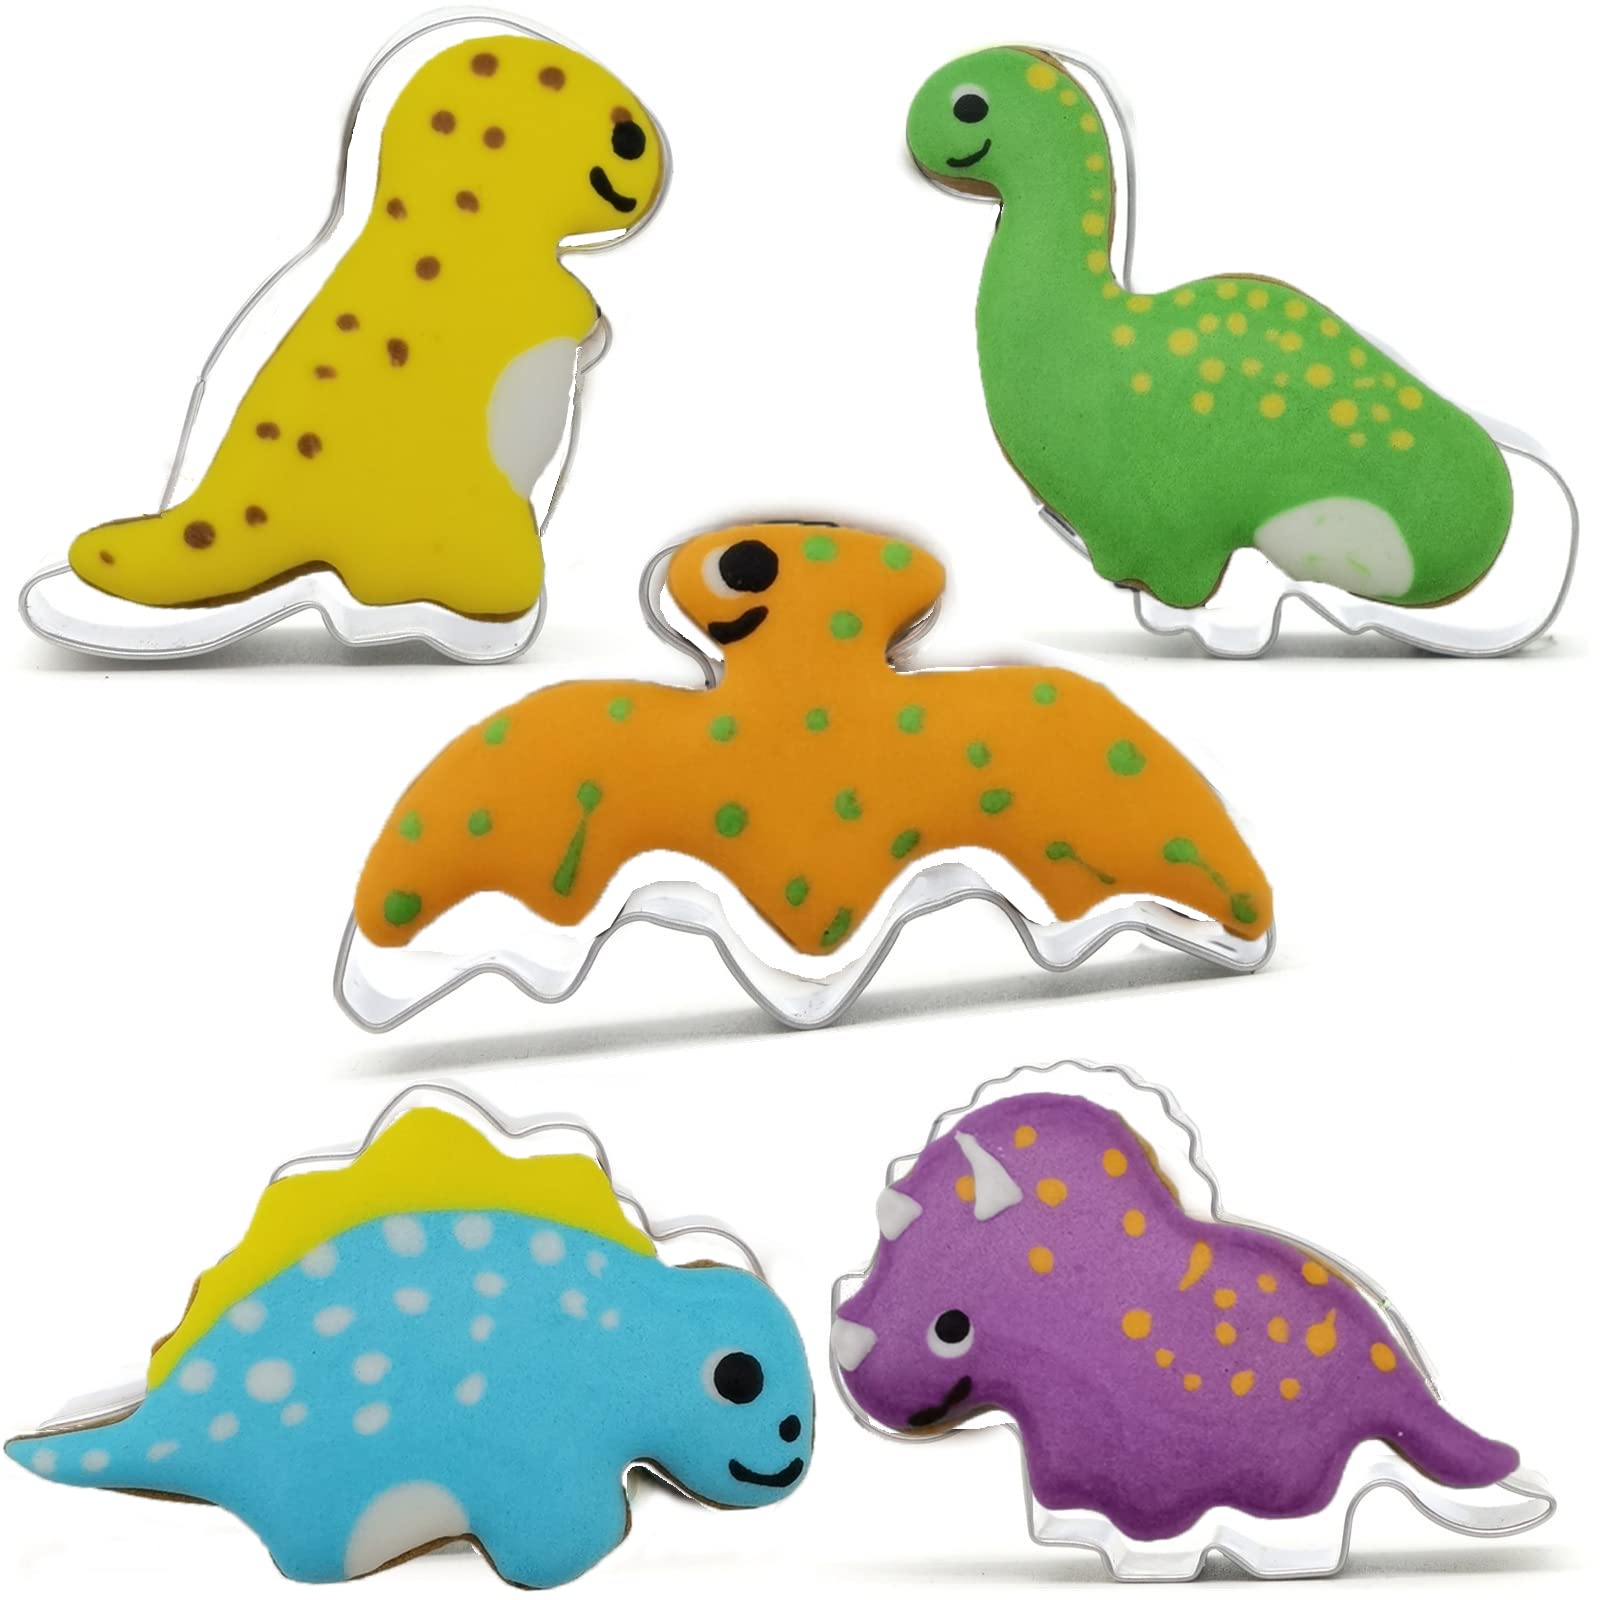 Mini Dinosaurs Shaped Cookie Cutter Set of 5 pcs, Stainless Steel Dino Fondant Cutters Set Pastry Biscuit Baking Clay DIY Molds for Kids